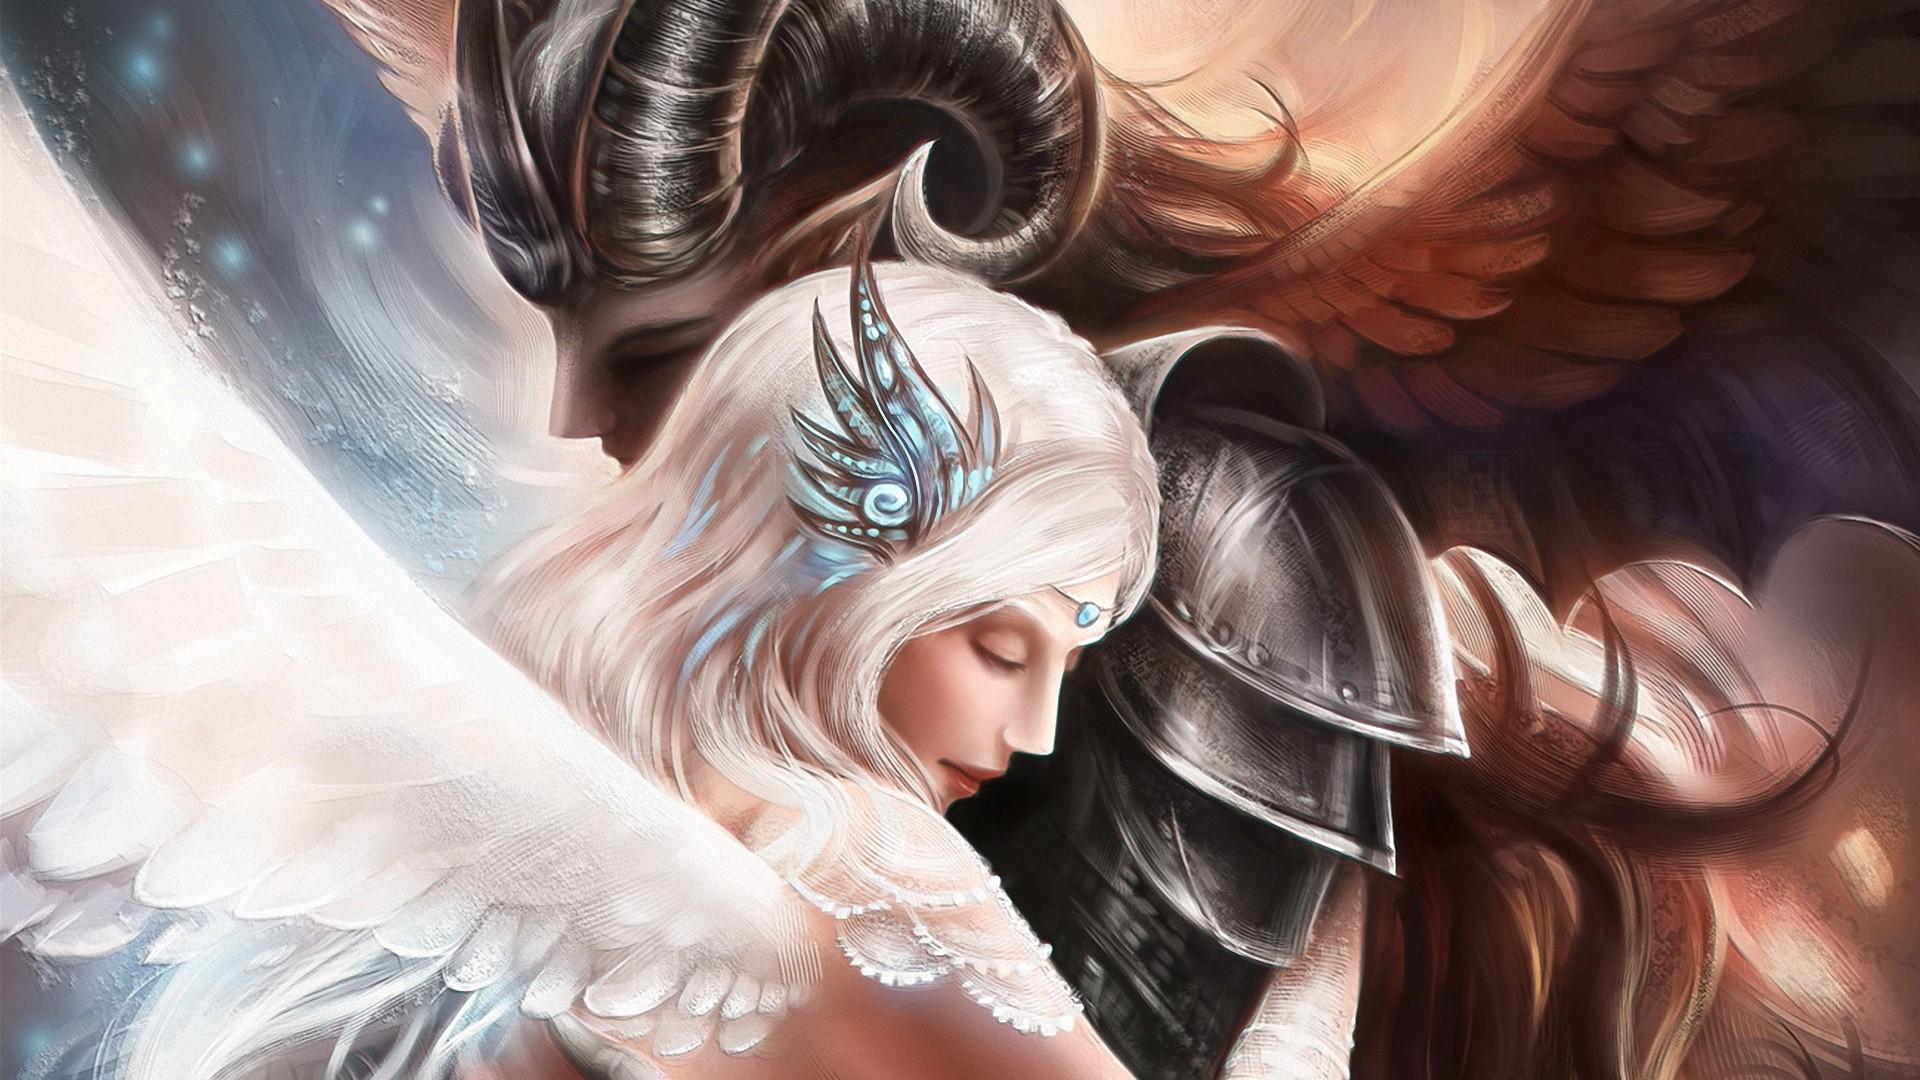 Angel And Demon Wallpaper (Picture)